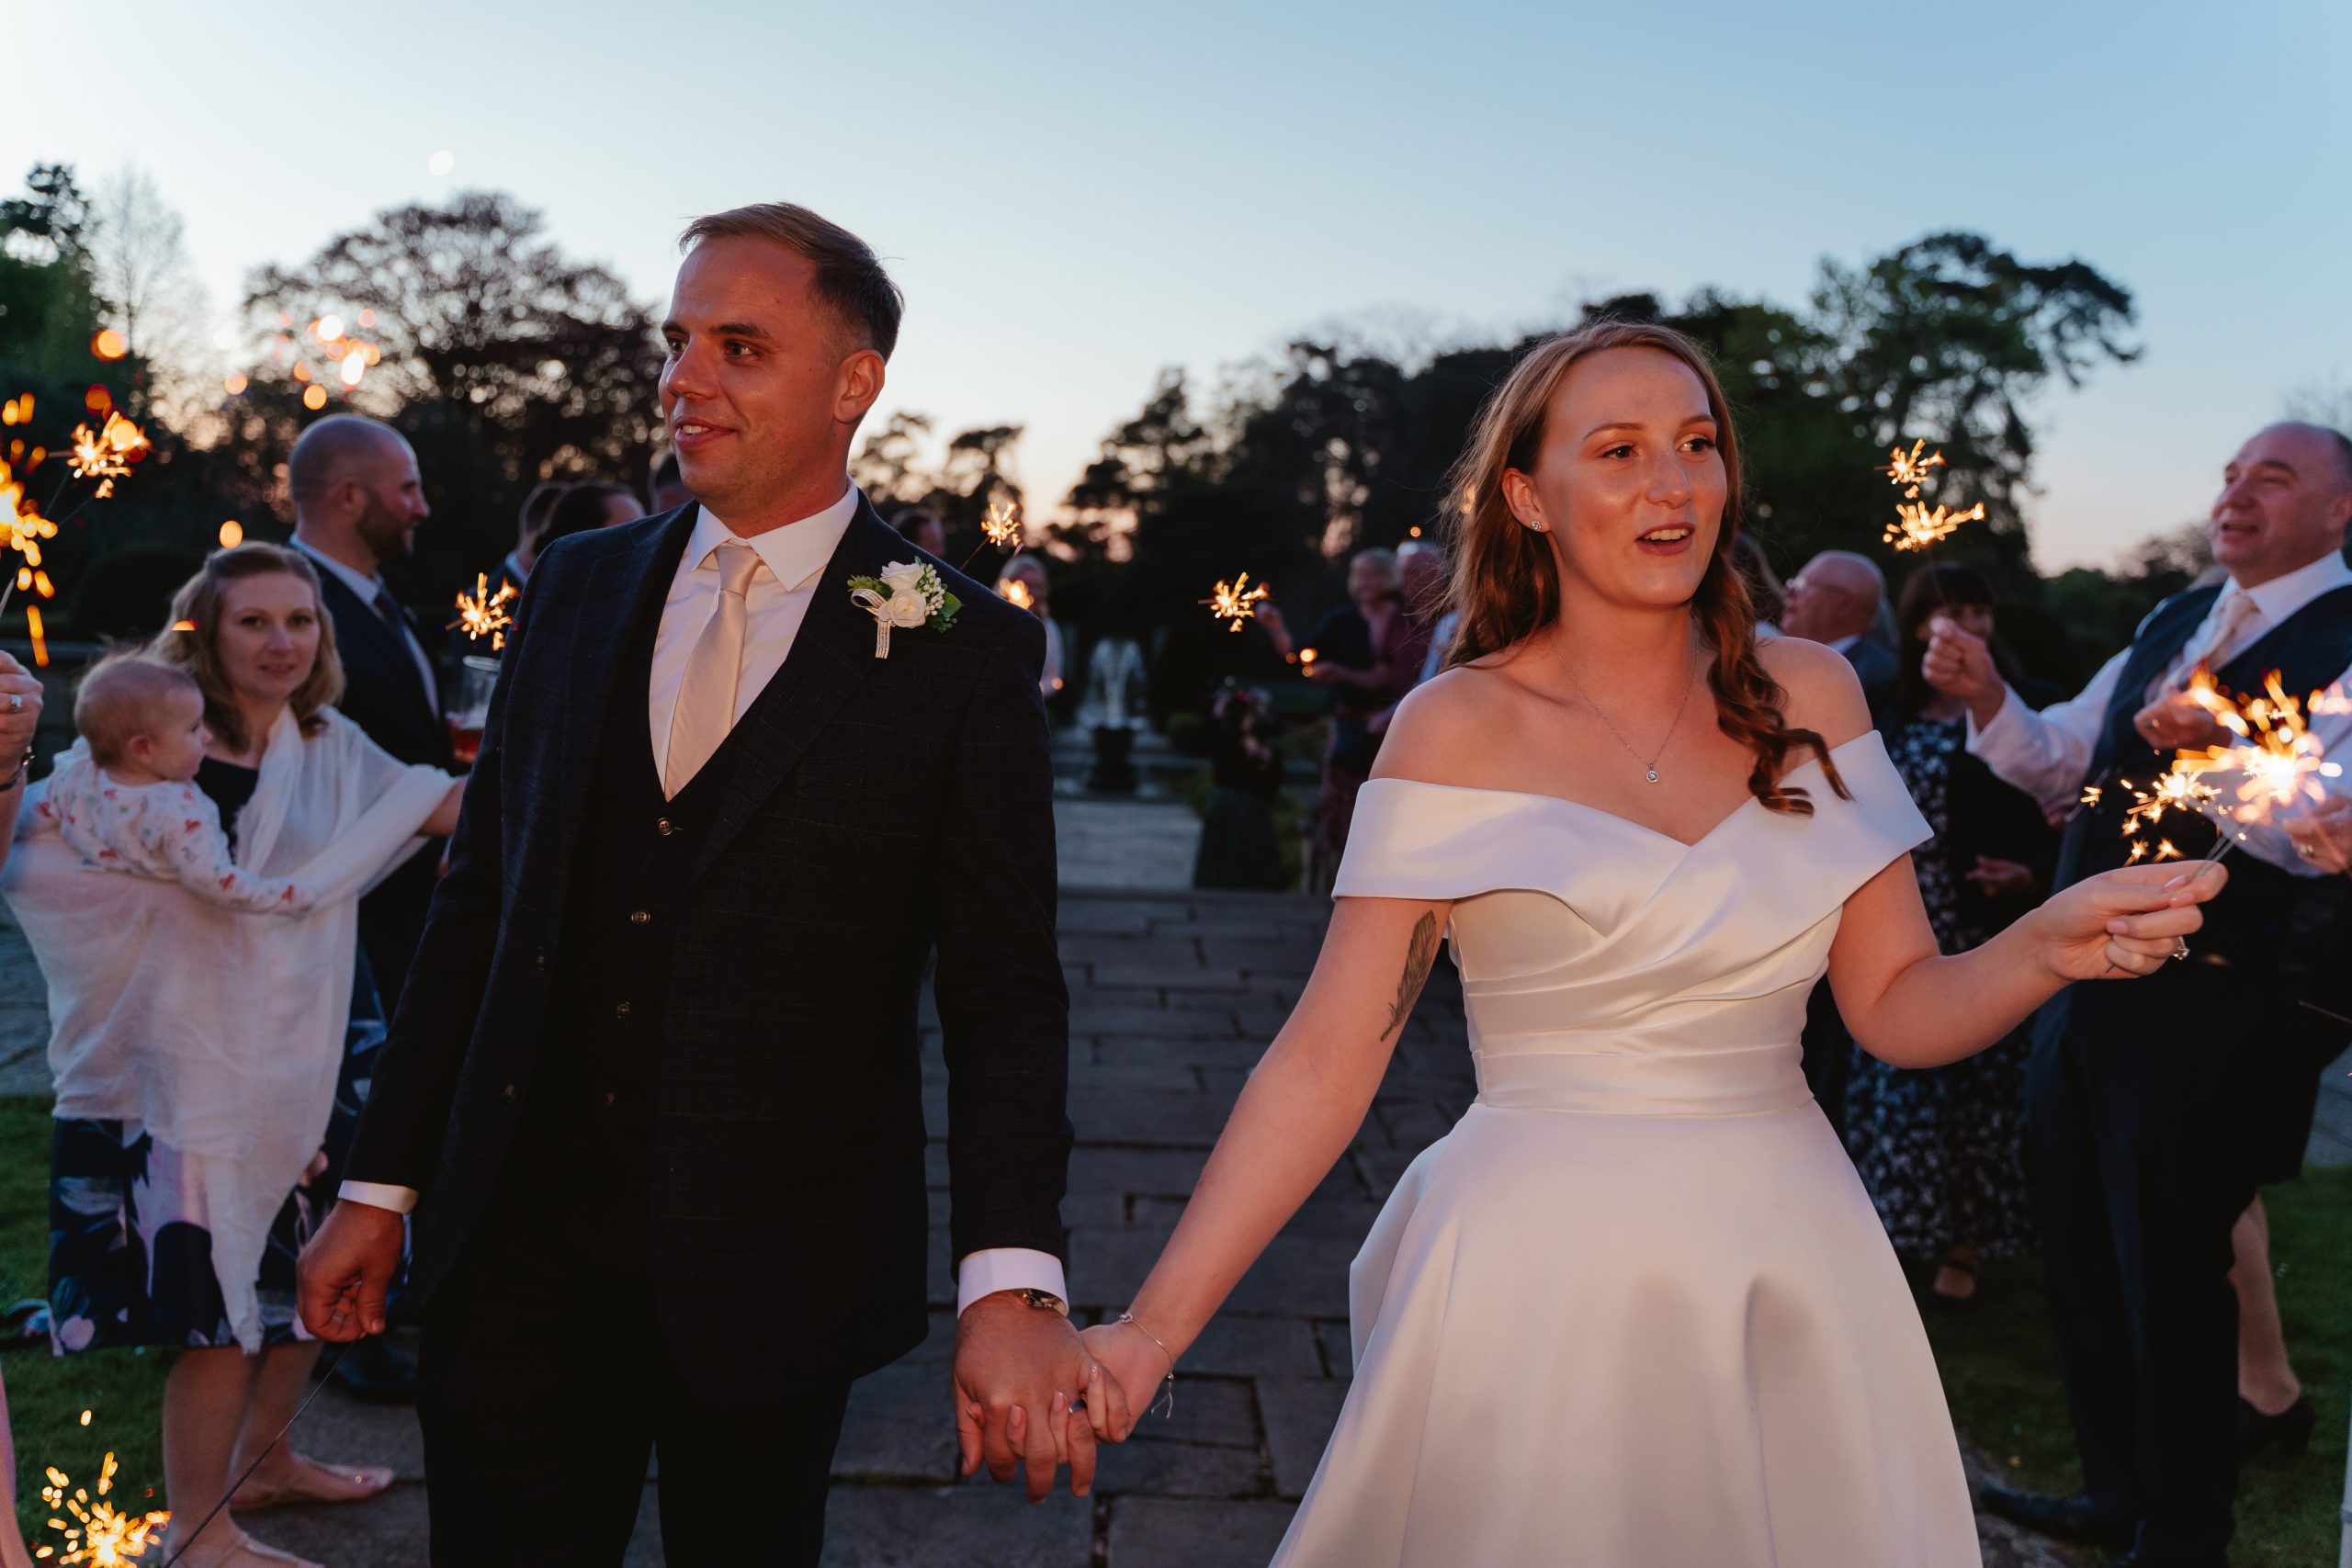 Wedding sparklers at Fanhams Hall in blue hour